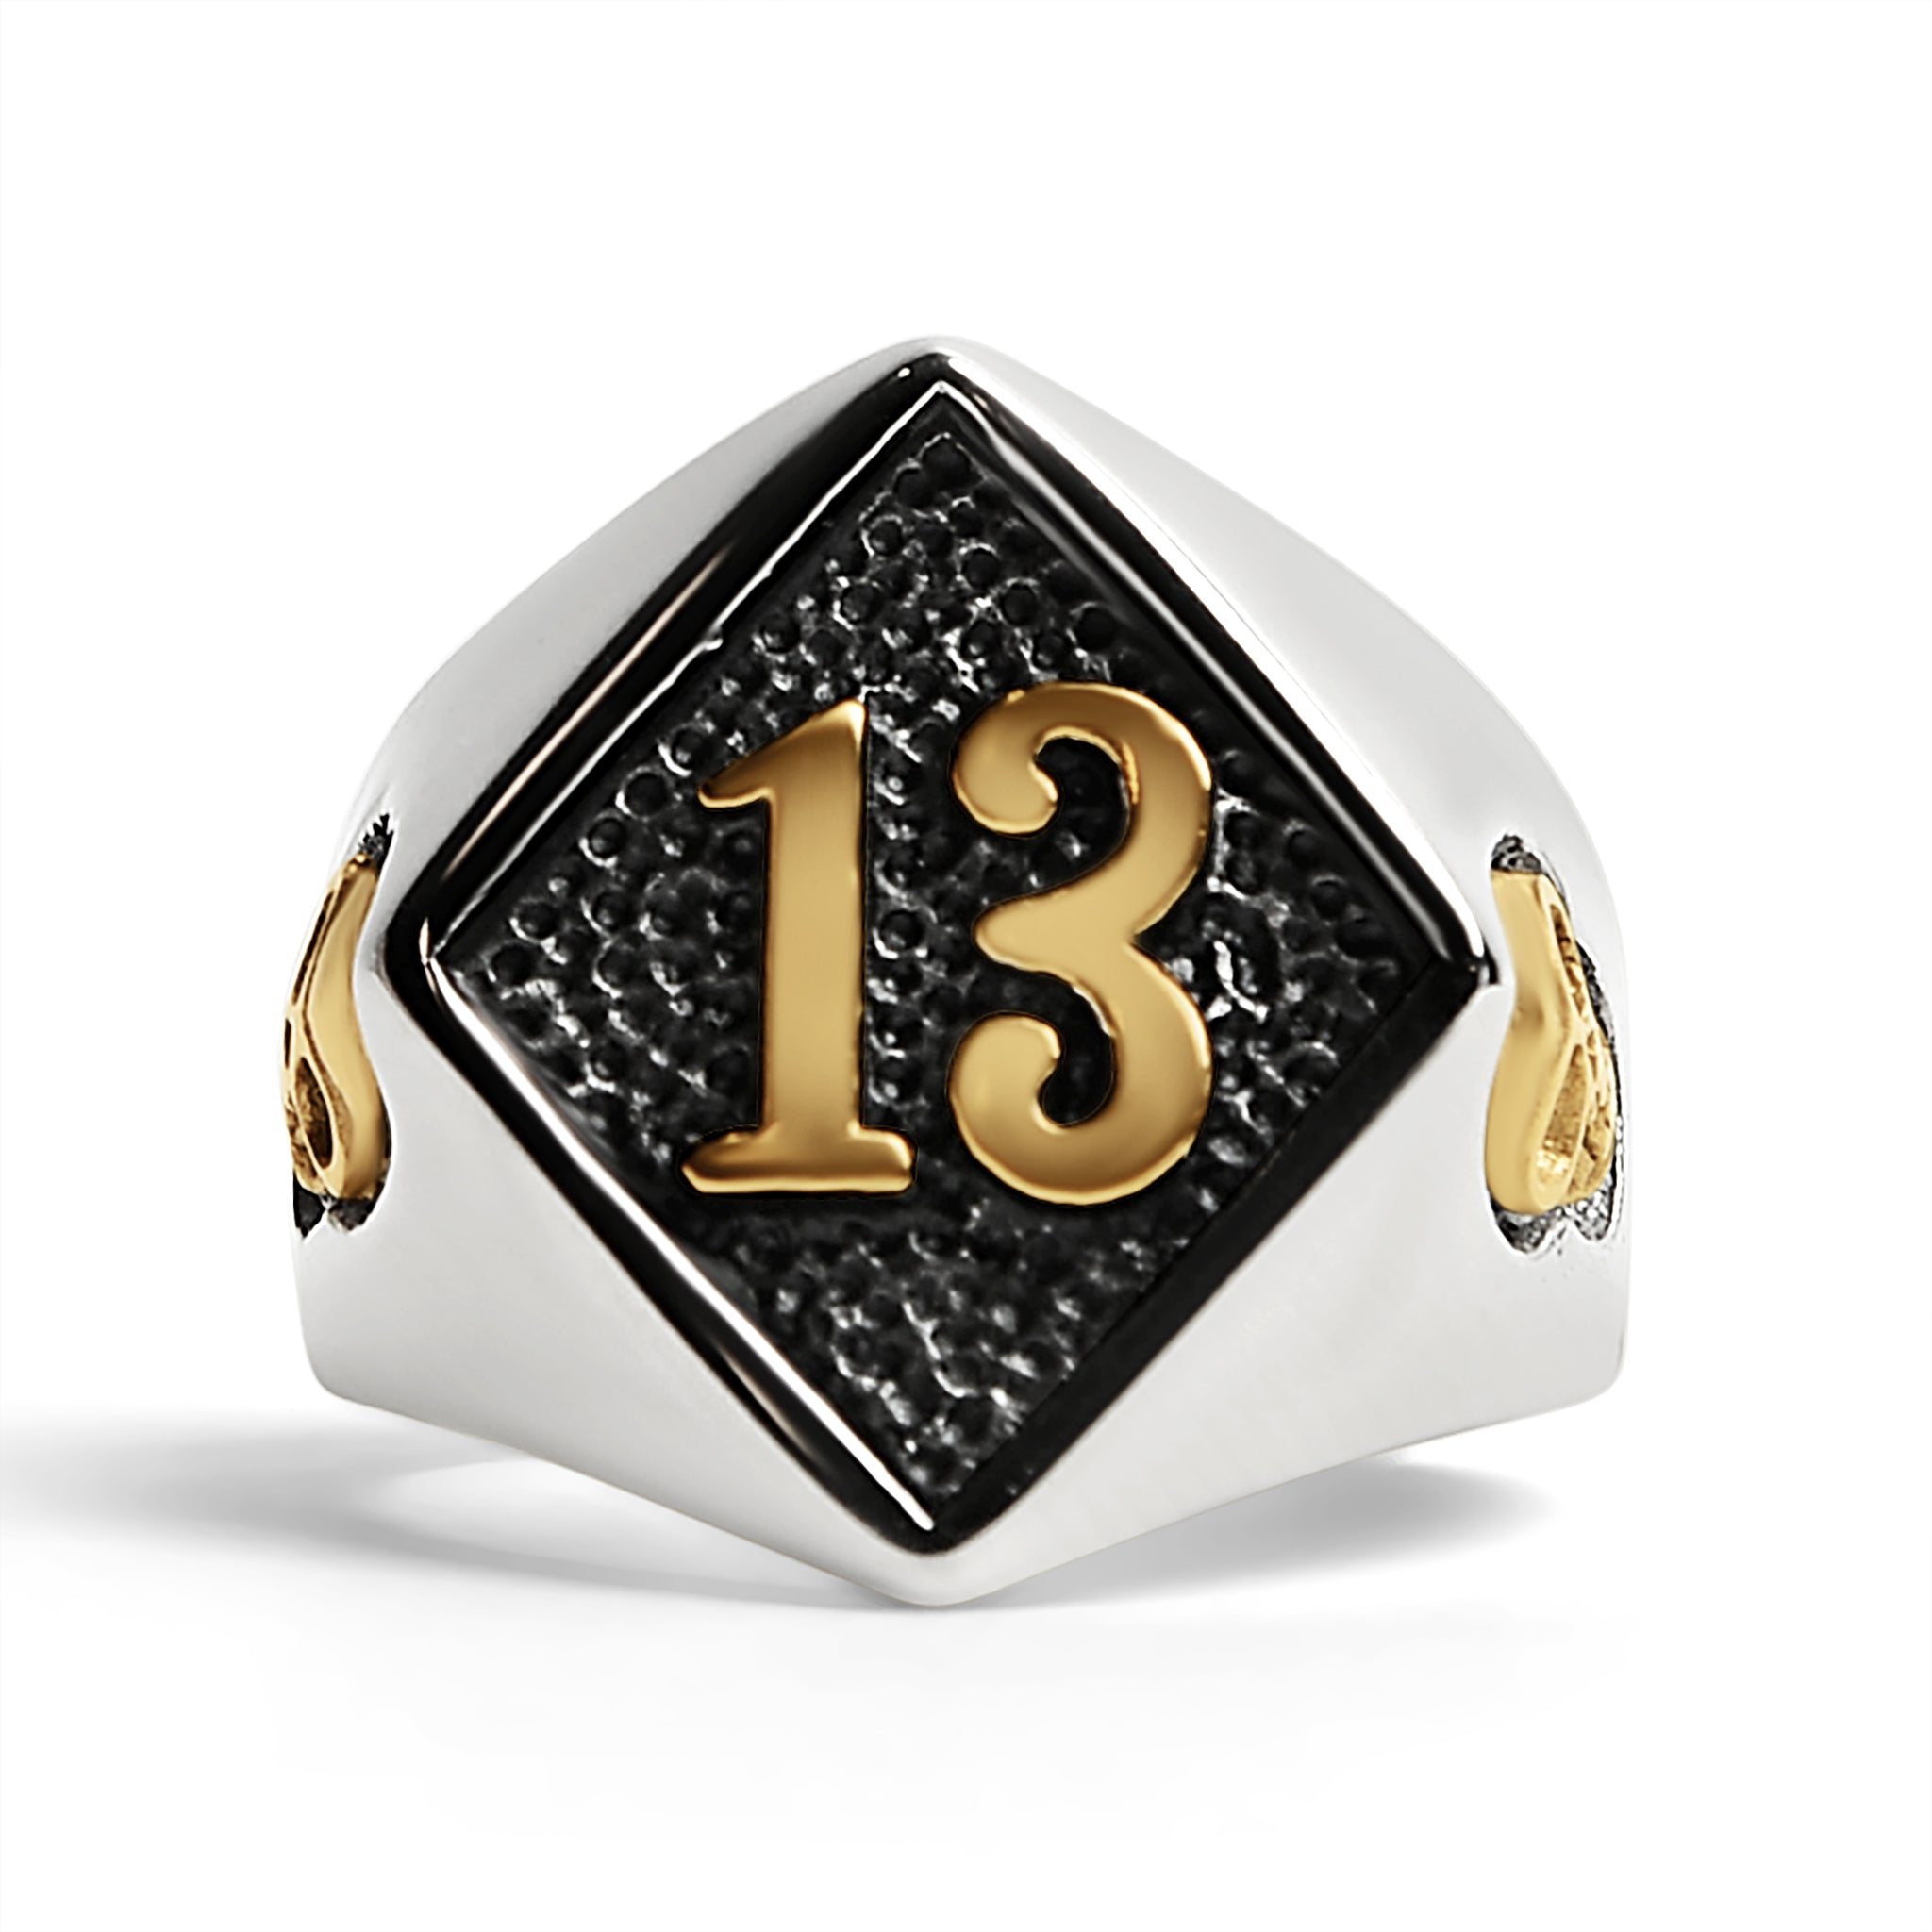 ''Stainless Steel 18K Gold Plated Accents ''''13'''' and SKULLs Signet Ring / SCR3042''